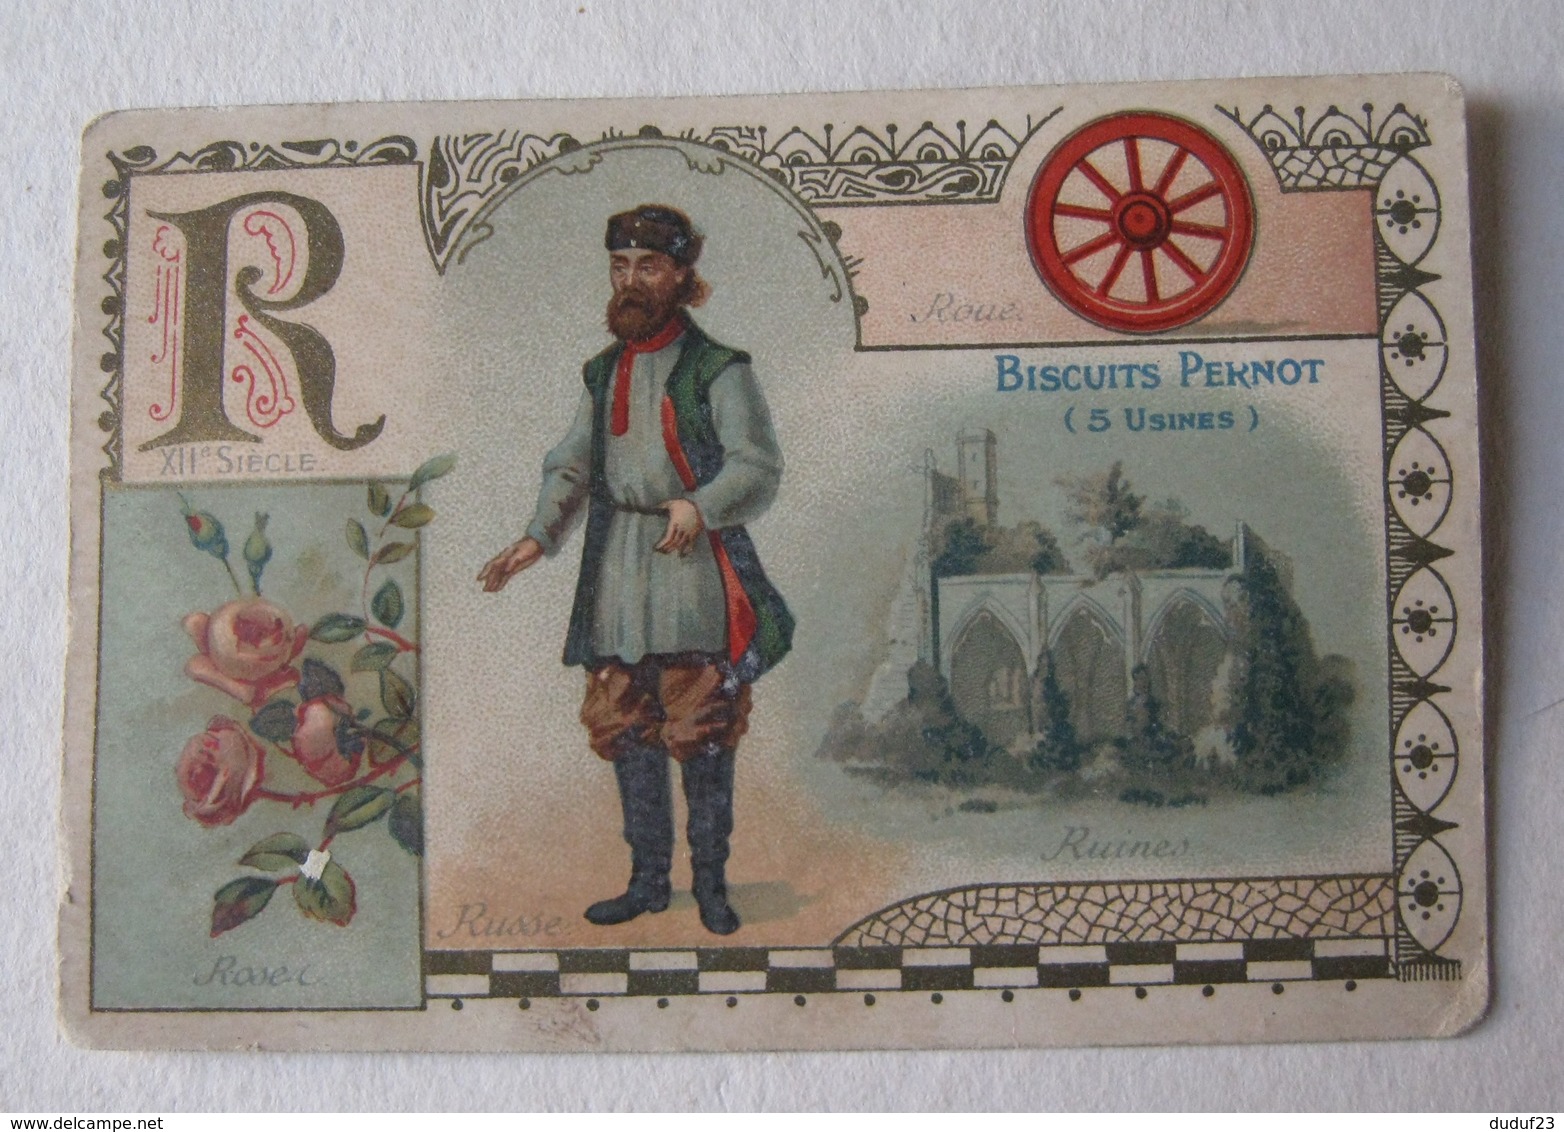 CHROMO BISCUITS PERNOT - ABECEDAIRE LETTRE R - ROSE RUSSE RUINE Lithographie Parisienne - Pernot